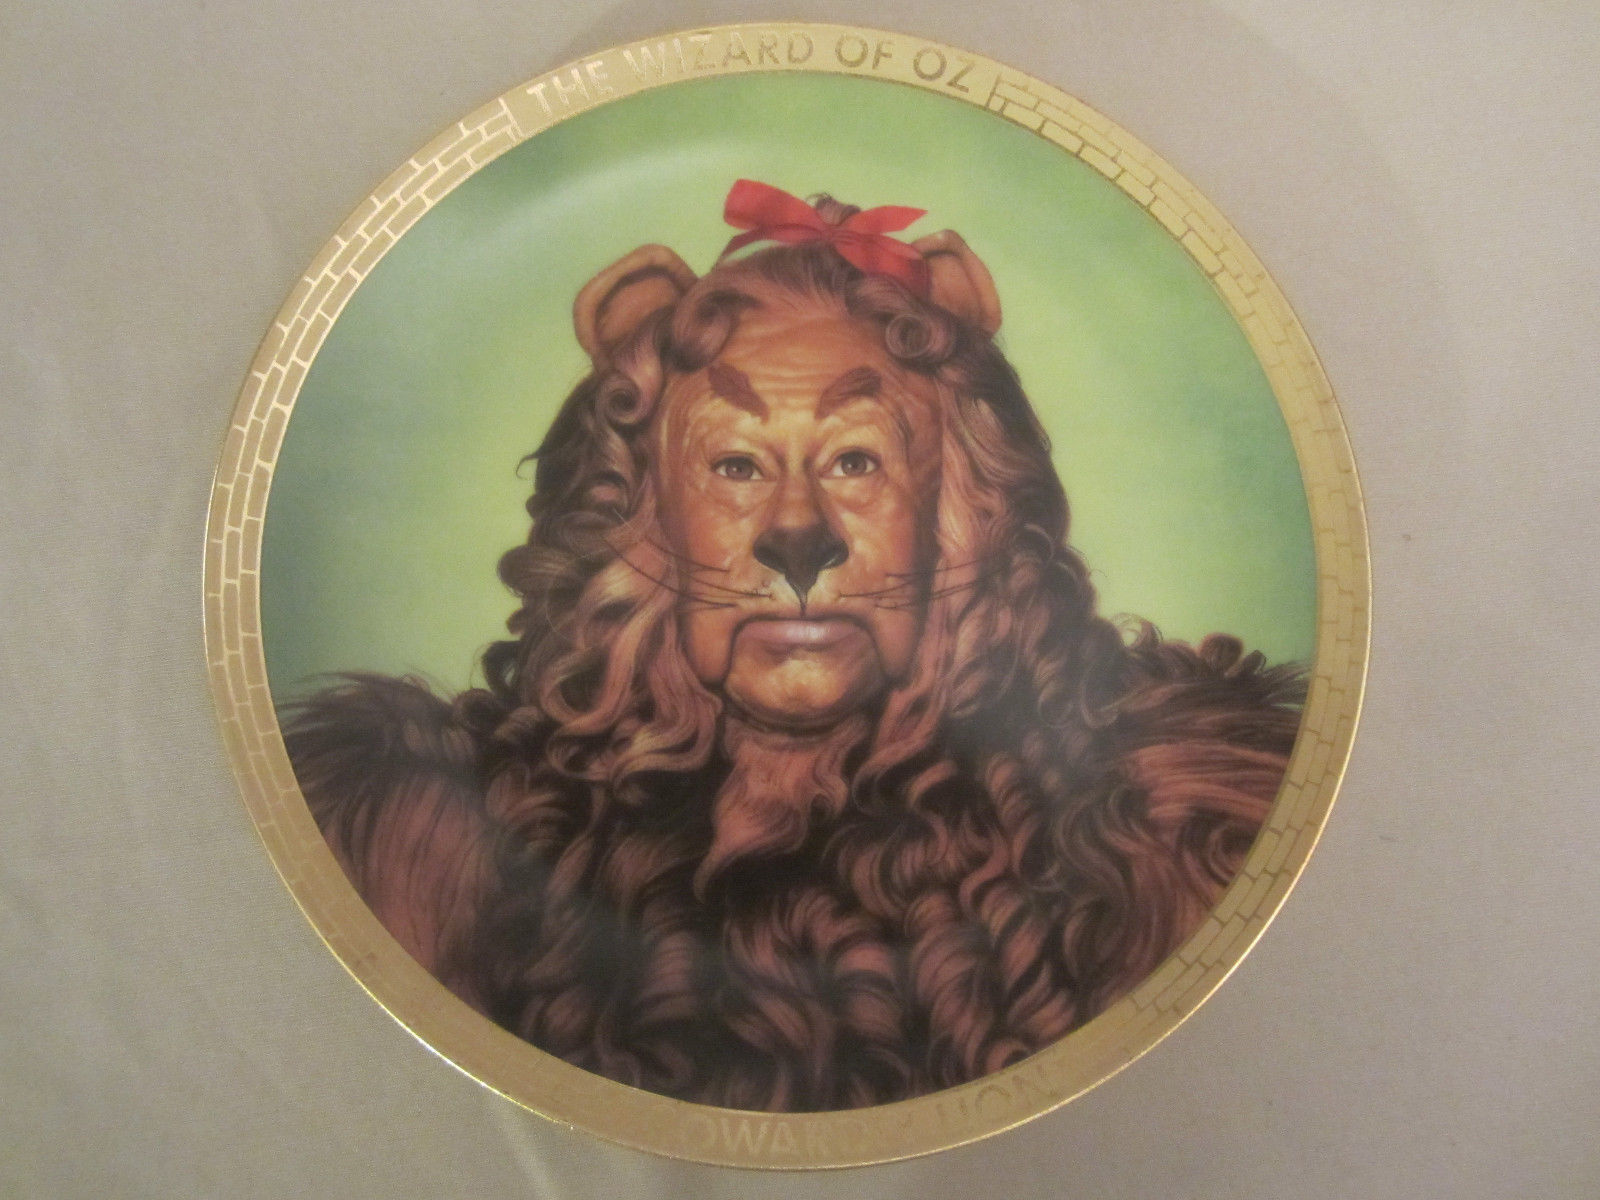 Primary image for COWARDLY LION collector plate WIZARD OF OZ PORTRAITS Thomas Blackshear